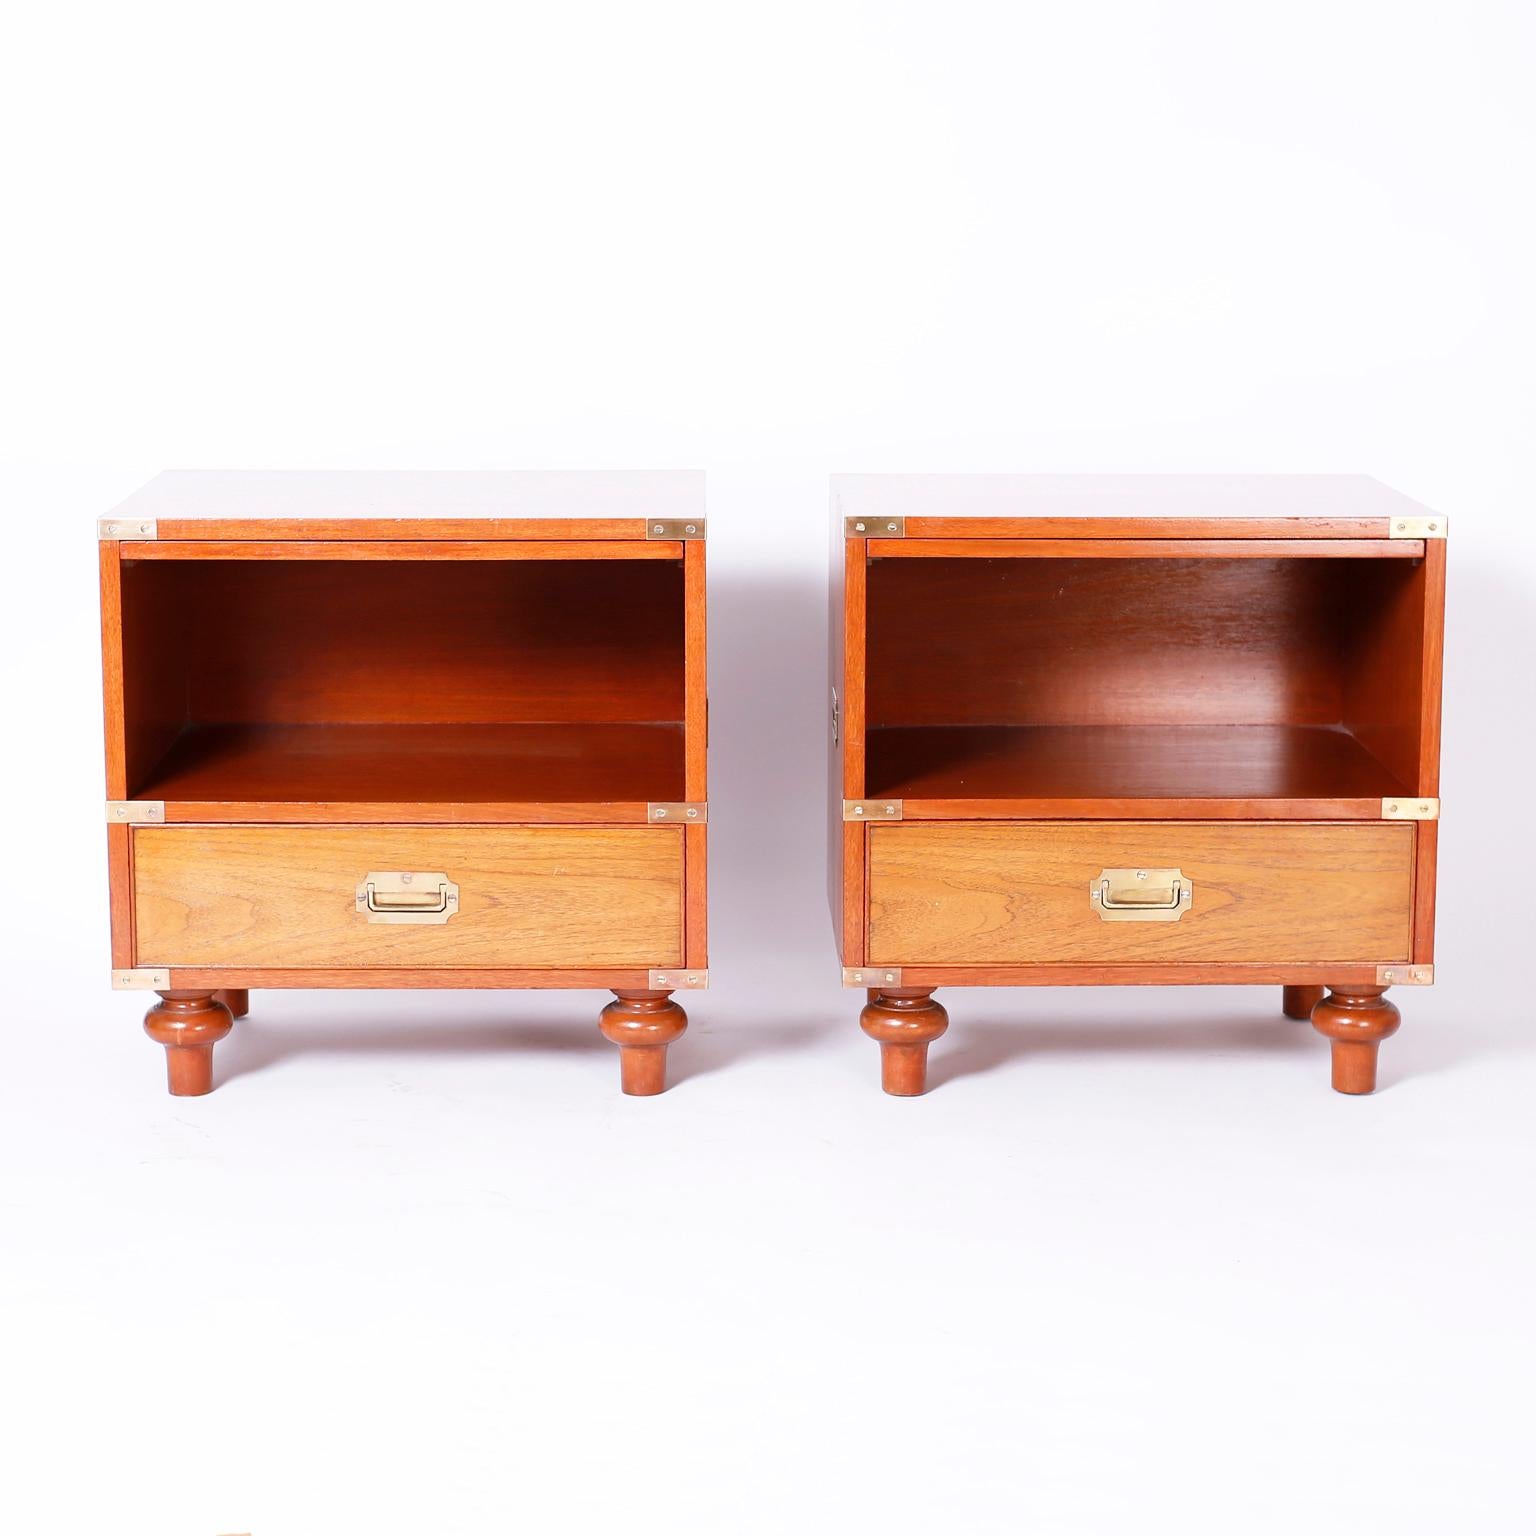 Handsome pair of bedside tables or nightstands with mahogany cases and walnut drawer fronts, brass hardware, slide out utility trays and turned feet. Signed Beacon Hill in a drawer.